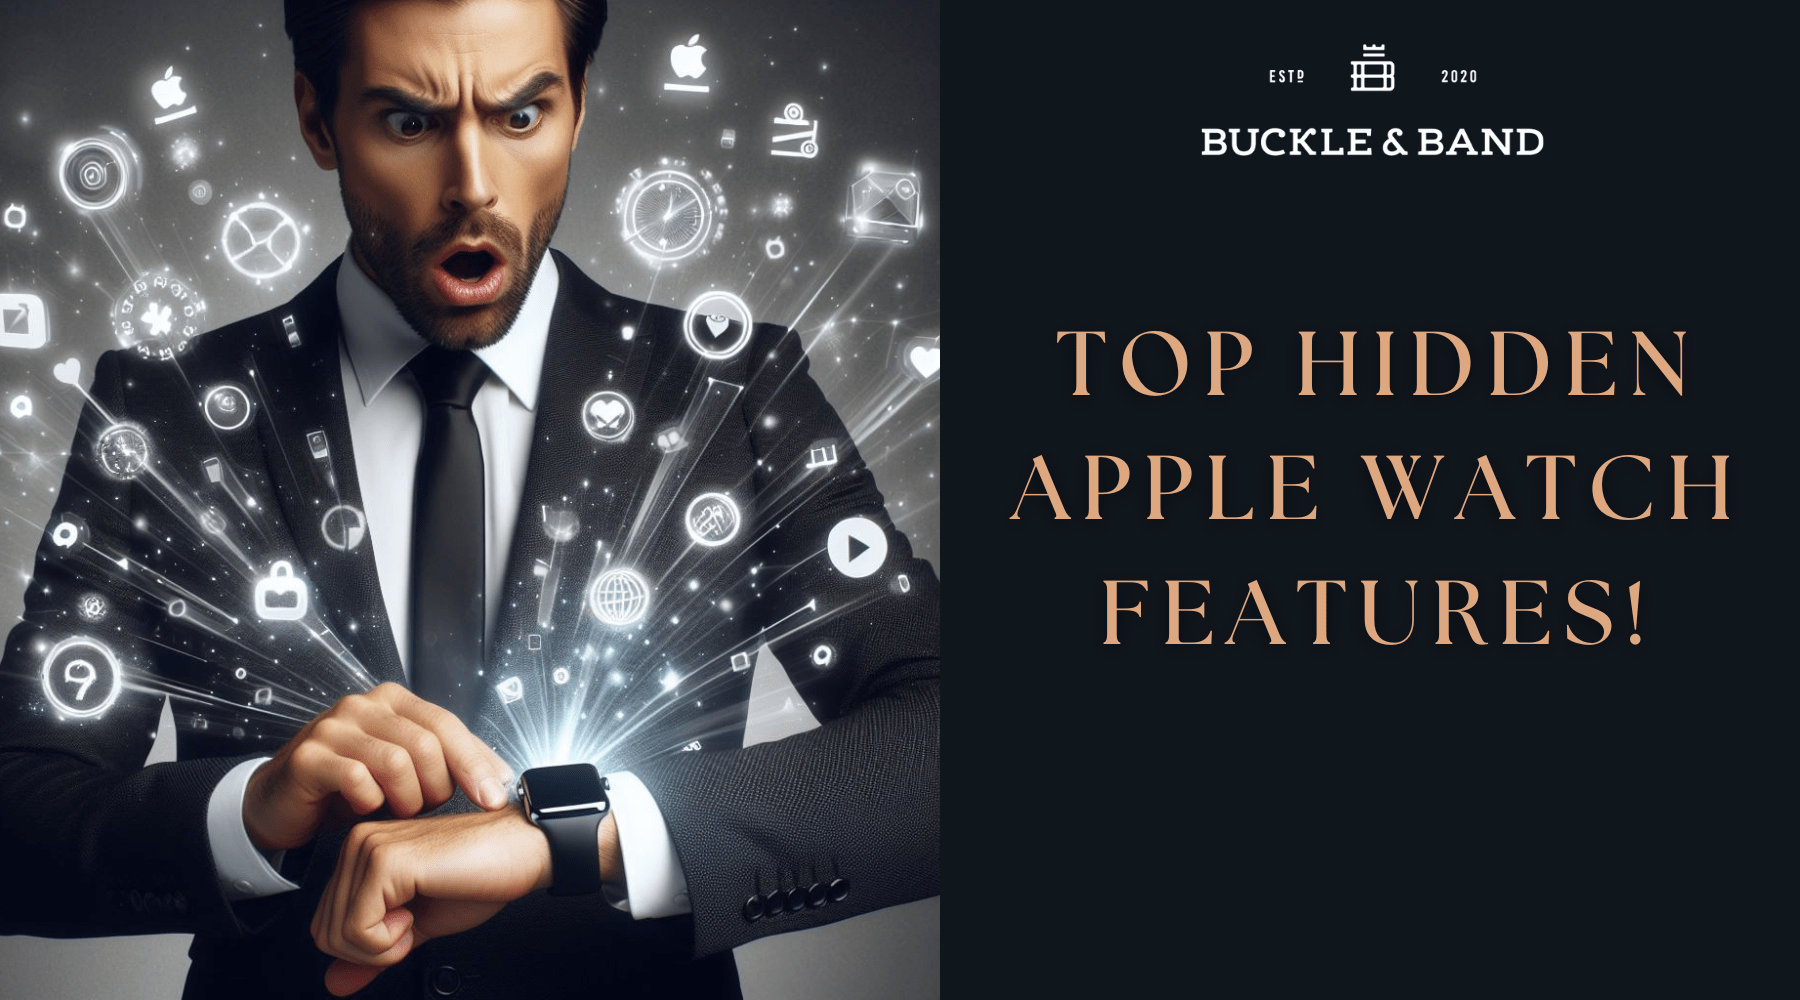 Top Hidden Features of the Apple Watch - Buckle and Band